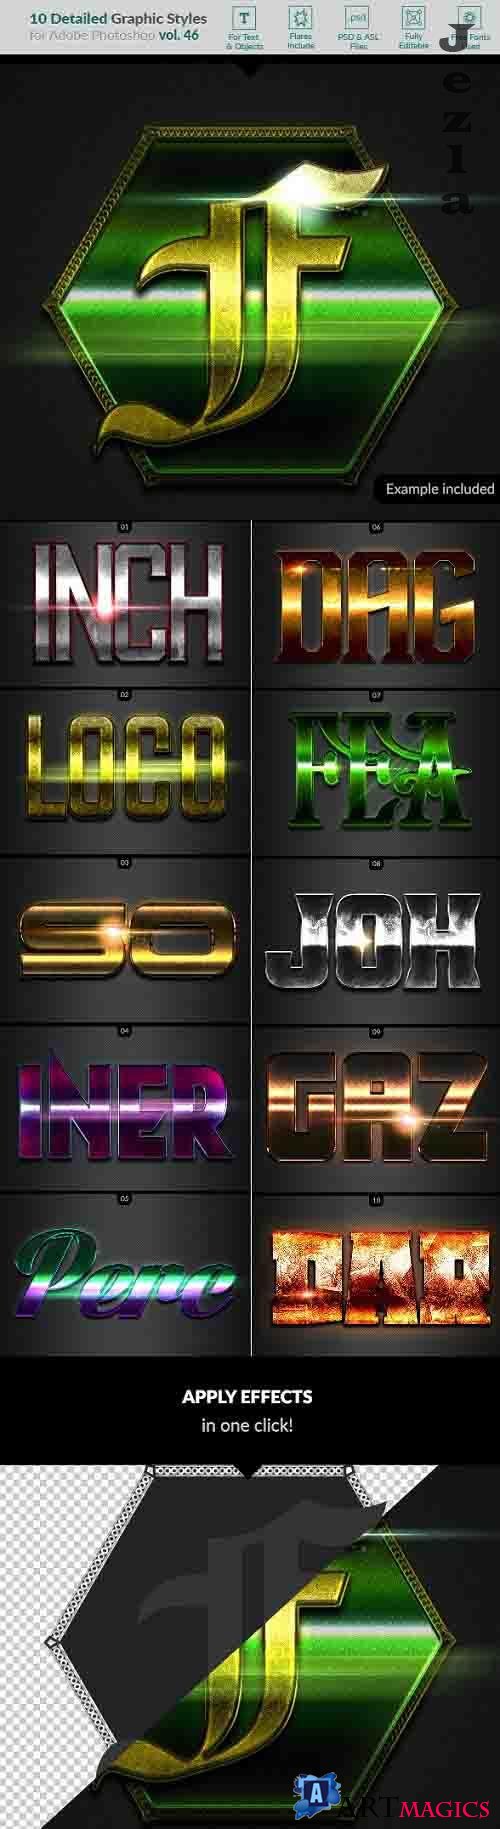 10 Text Effects Vol. 46 - 25813616